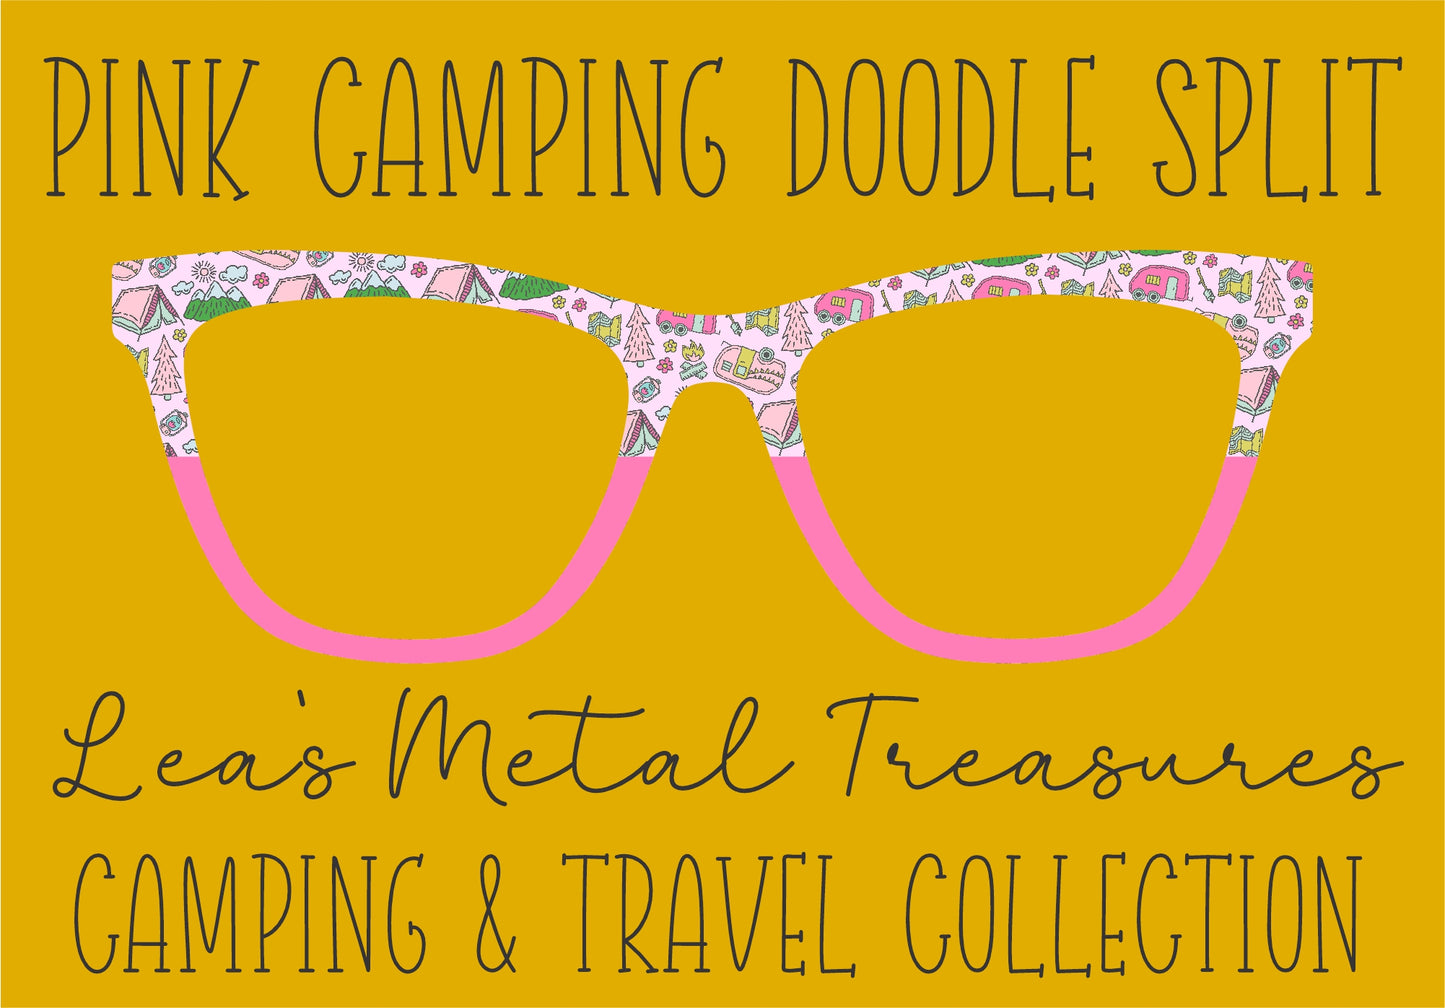 PINK CAMPING DOODLE SPLIT Eyewear Frame Toppers COMES WITH MAGNETS